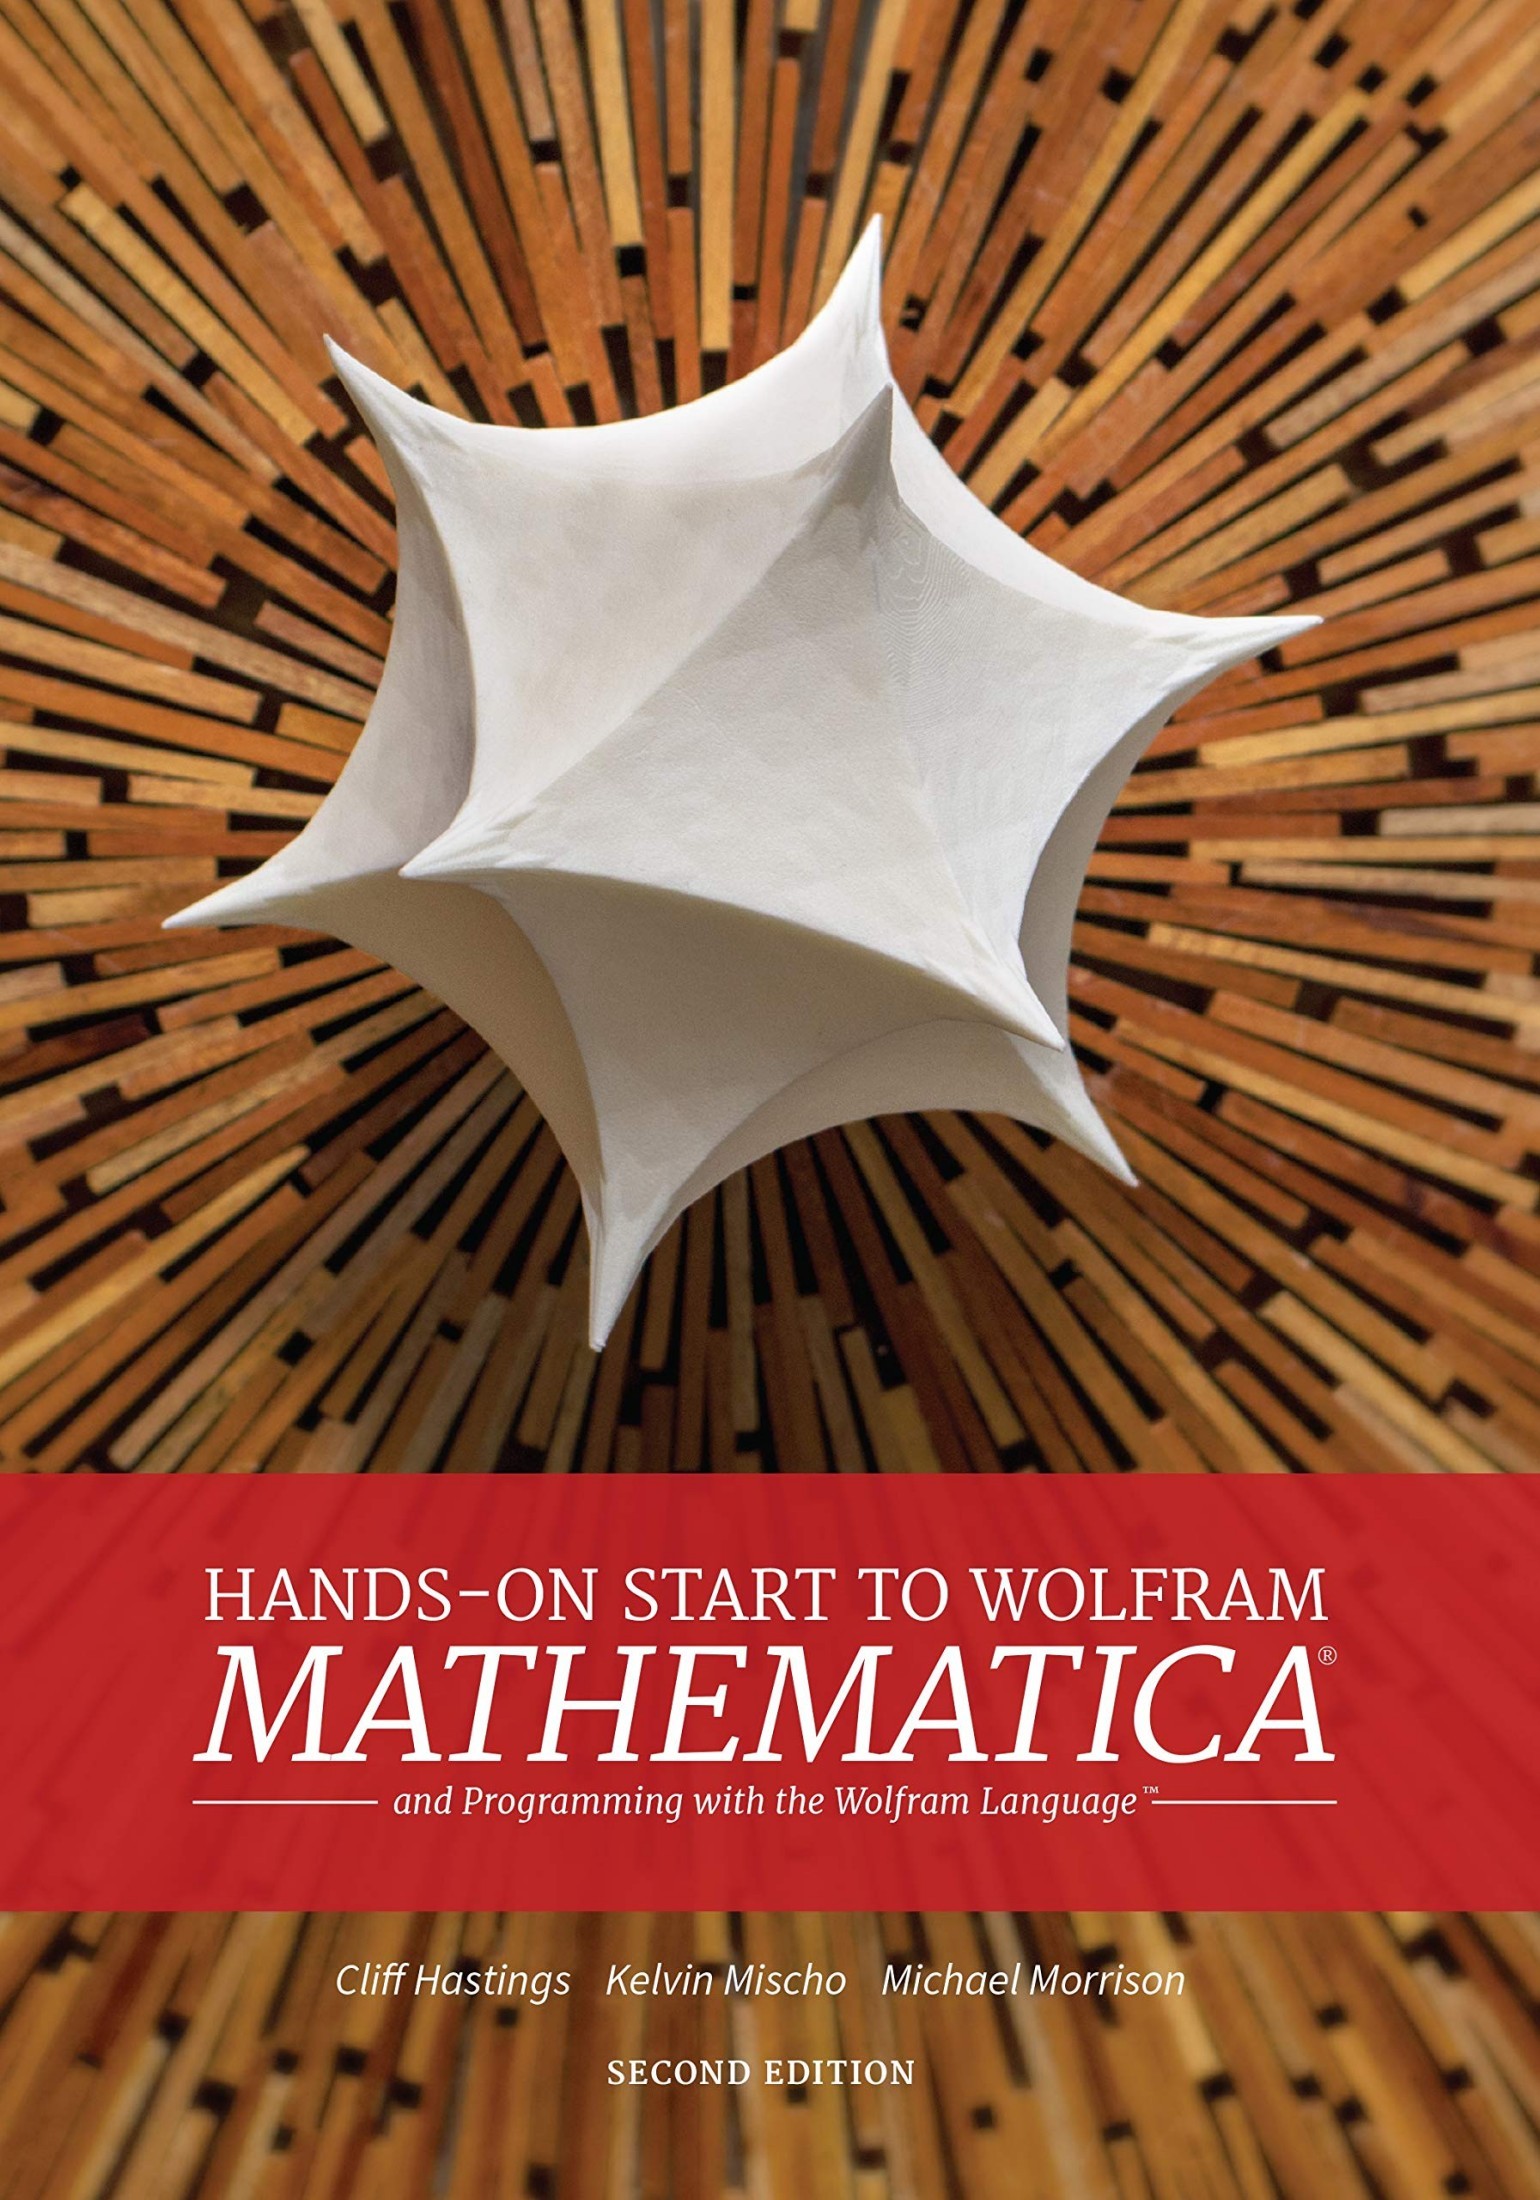 Addendum to the MATHEMATICA Book: A Guide to the New Functions and Features Introduced in Mathematica Version 4